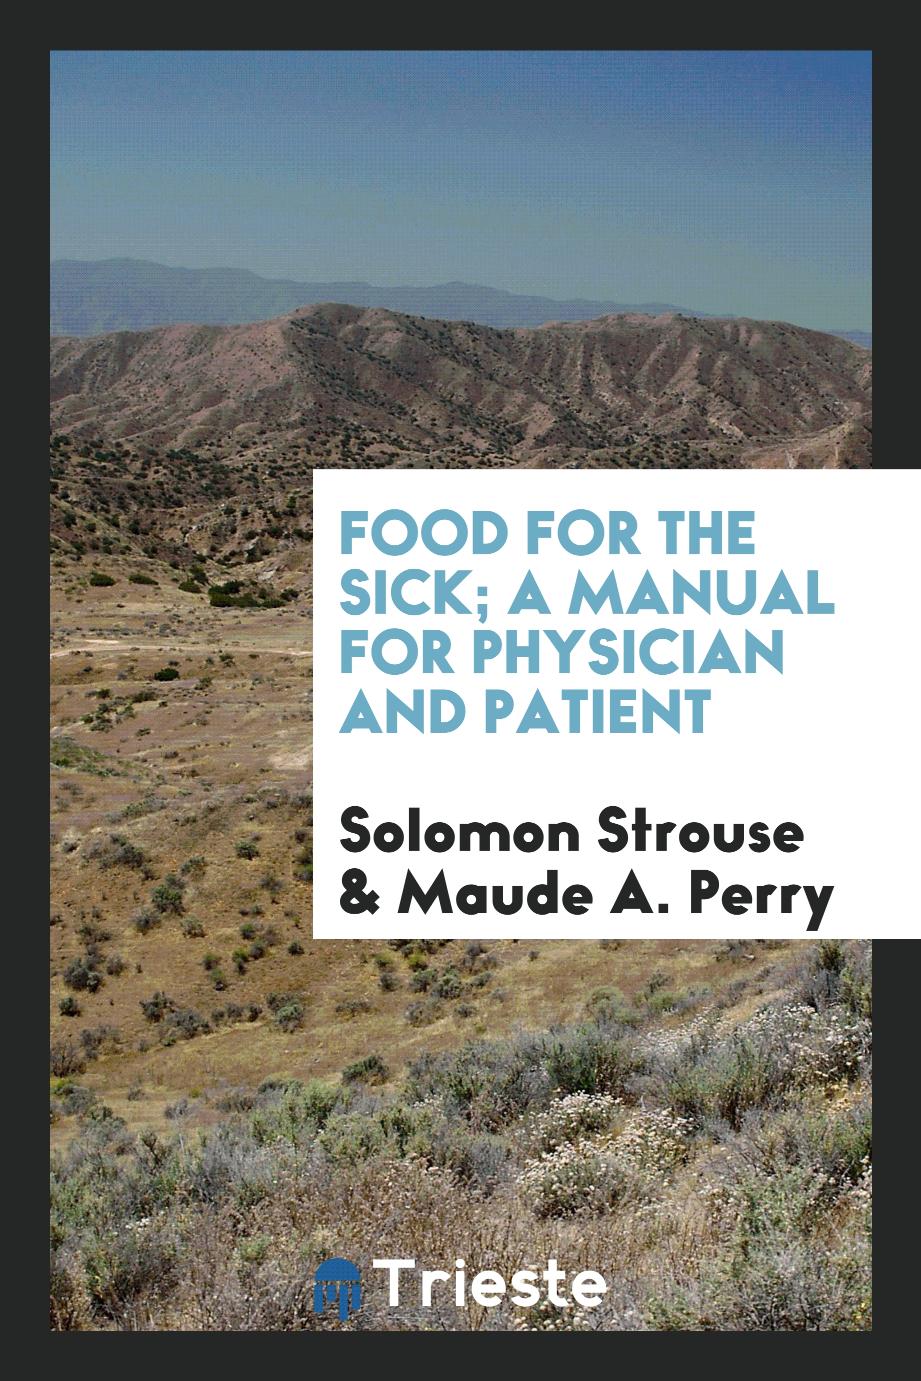 Food for the sick; a manual for physician and patient